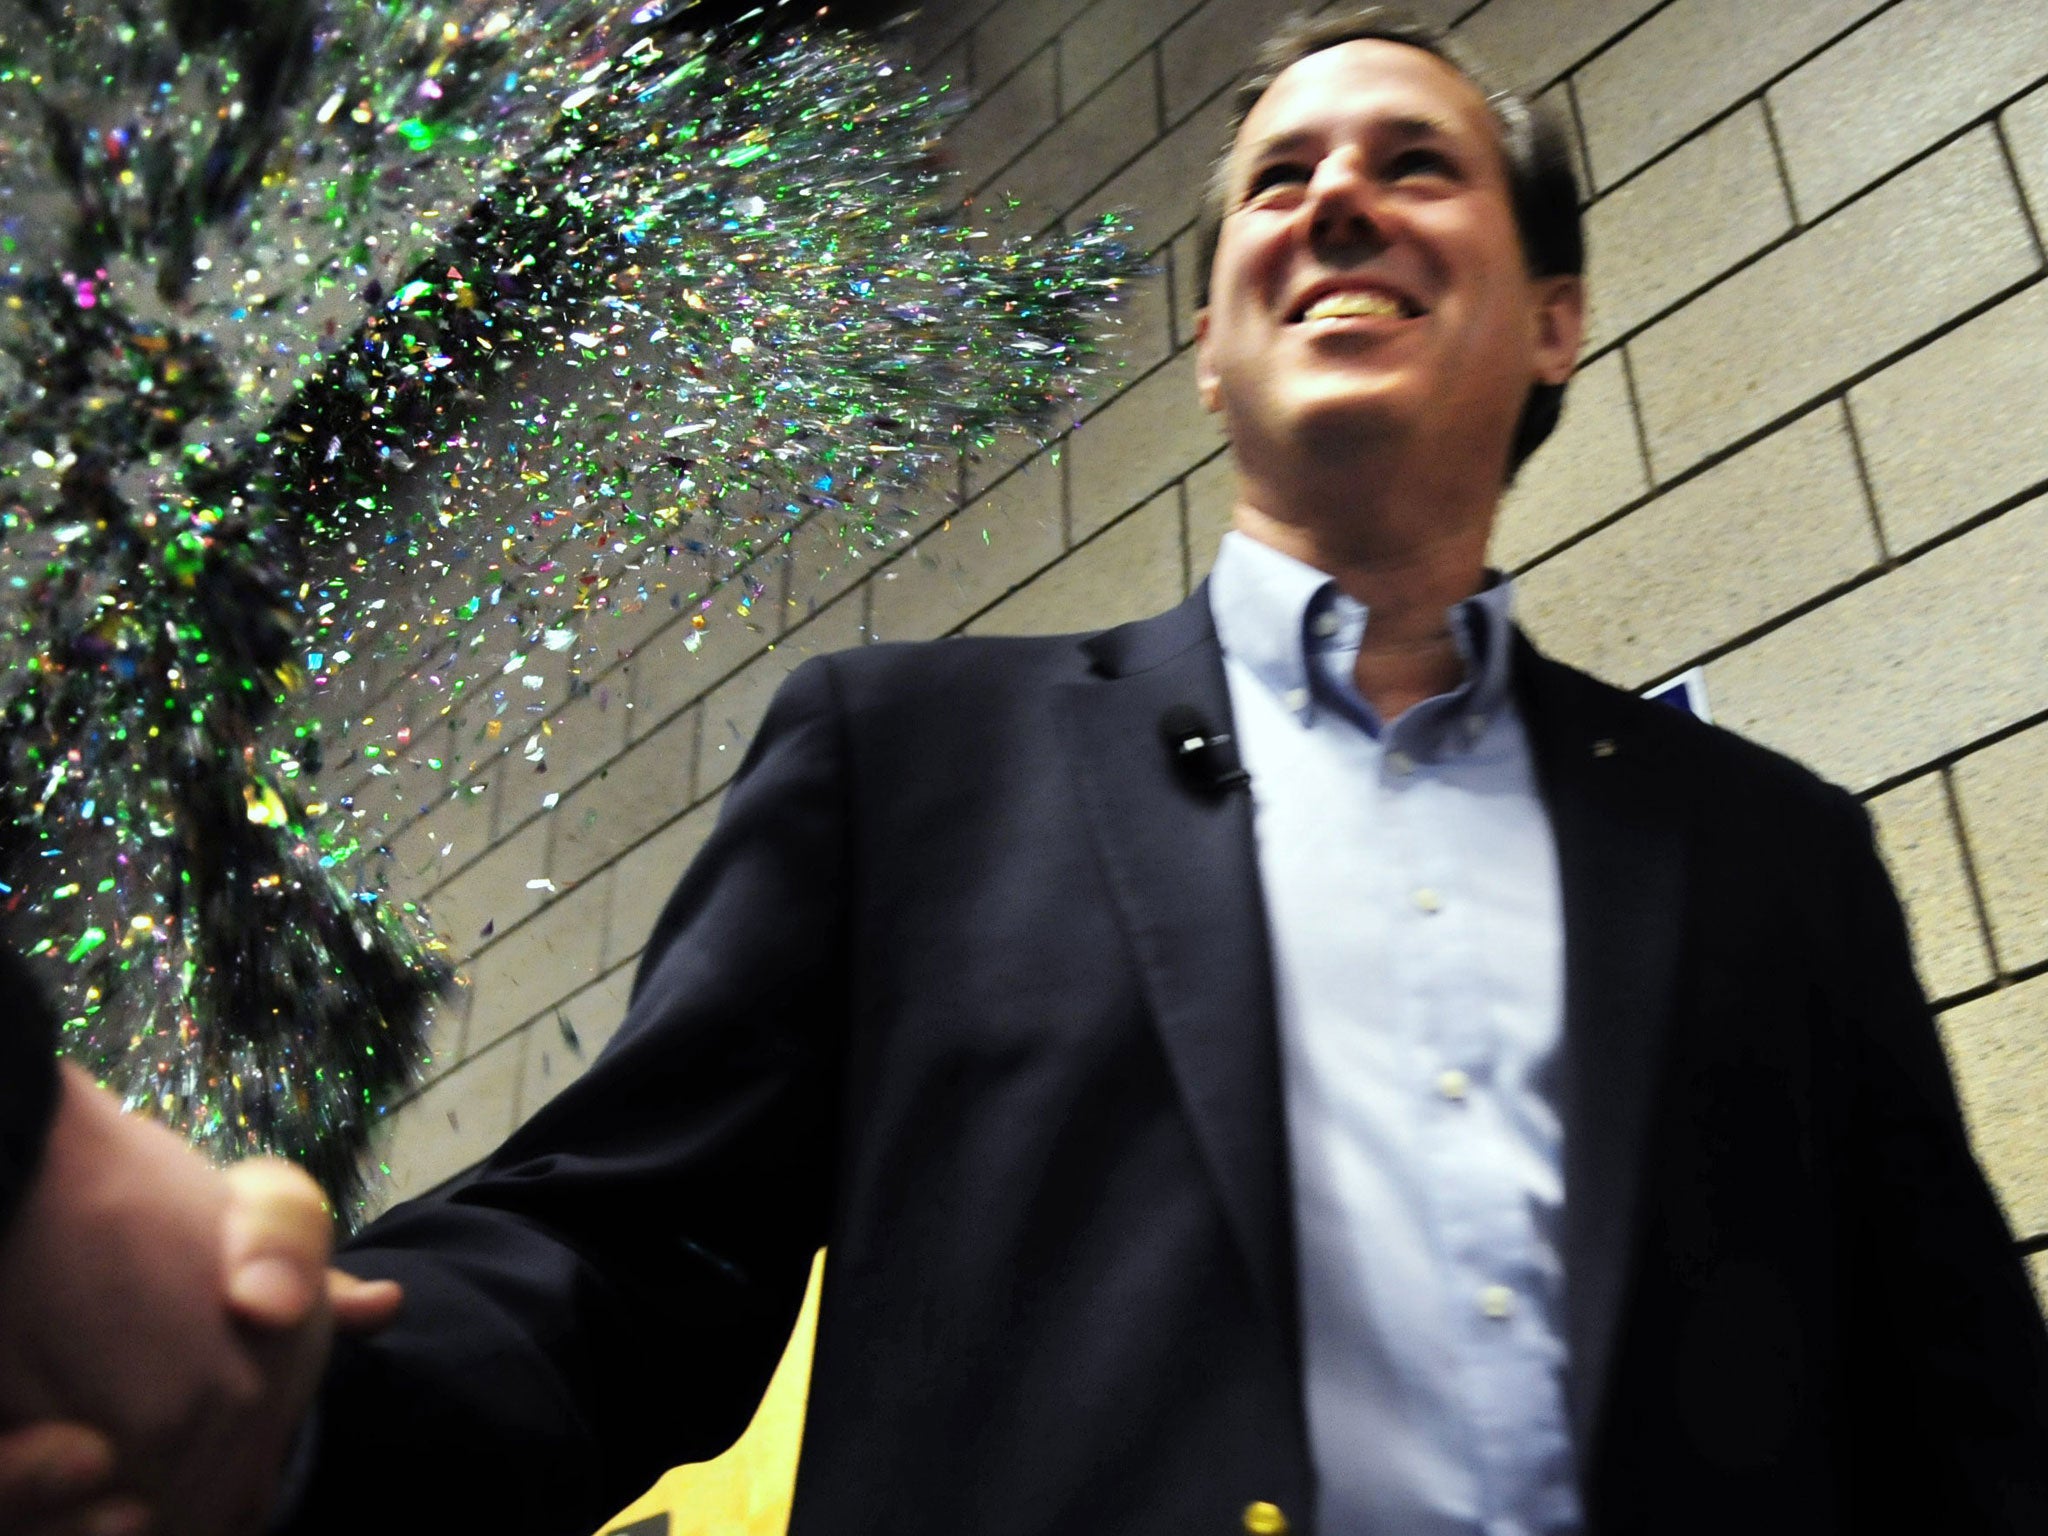 Rick Santorum was repeatedly glitter-bombed during his presidential candidacy